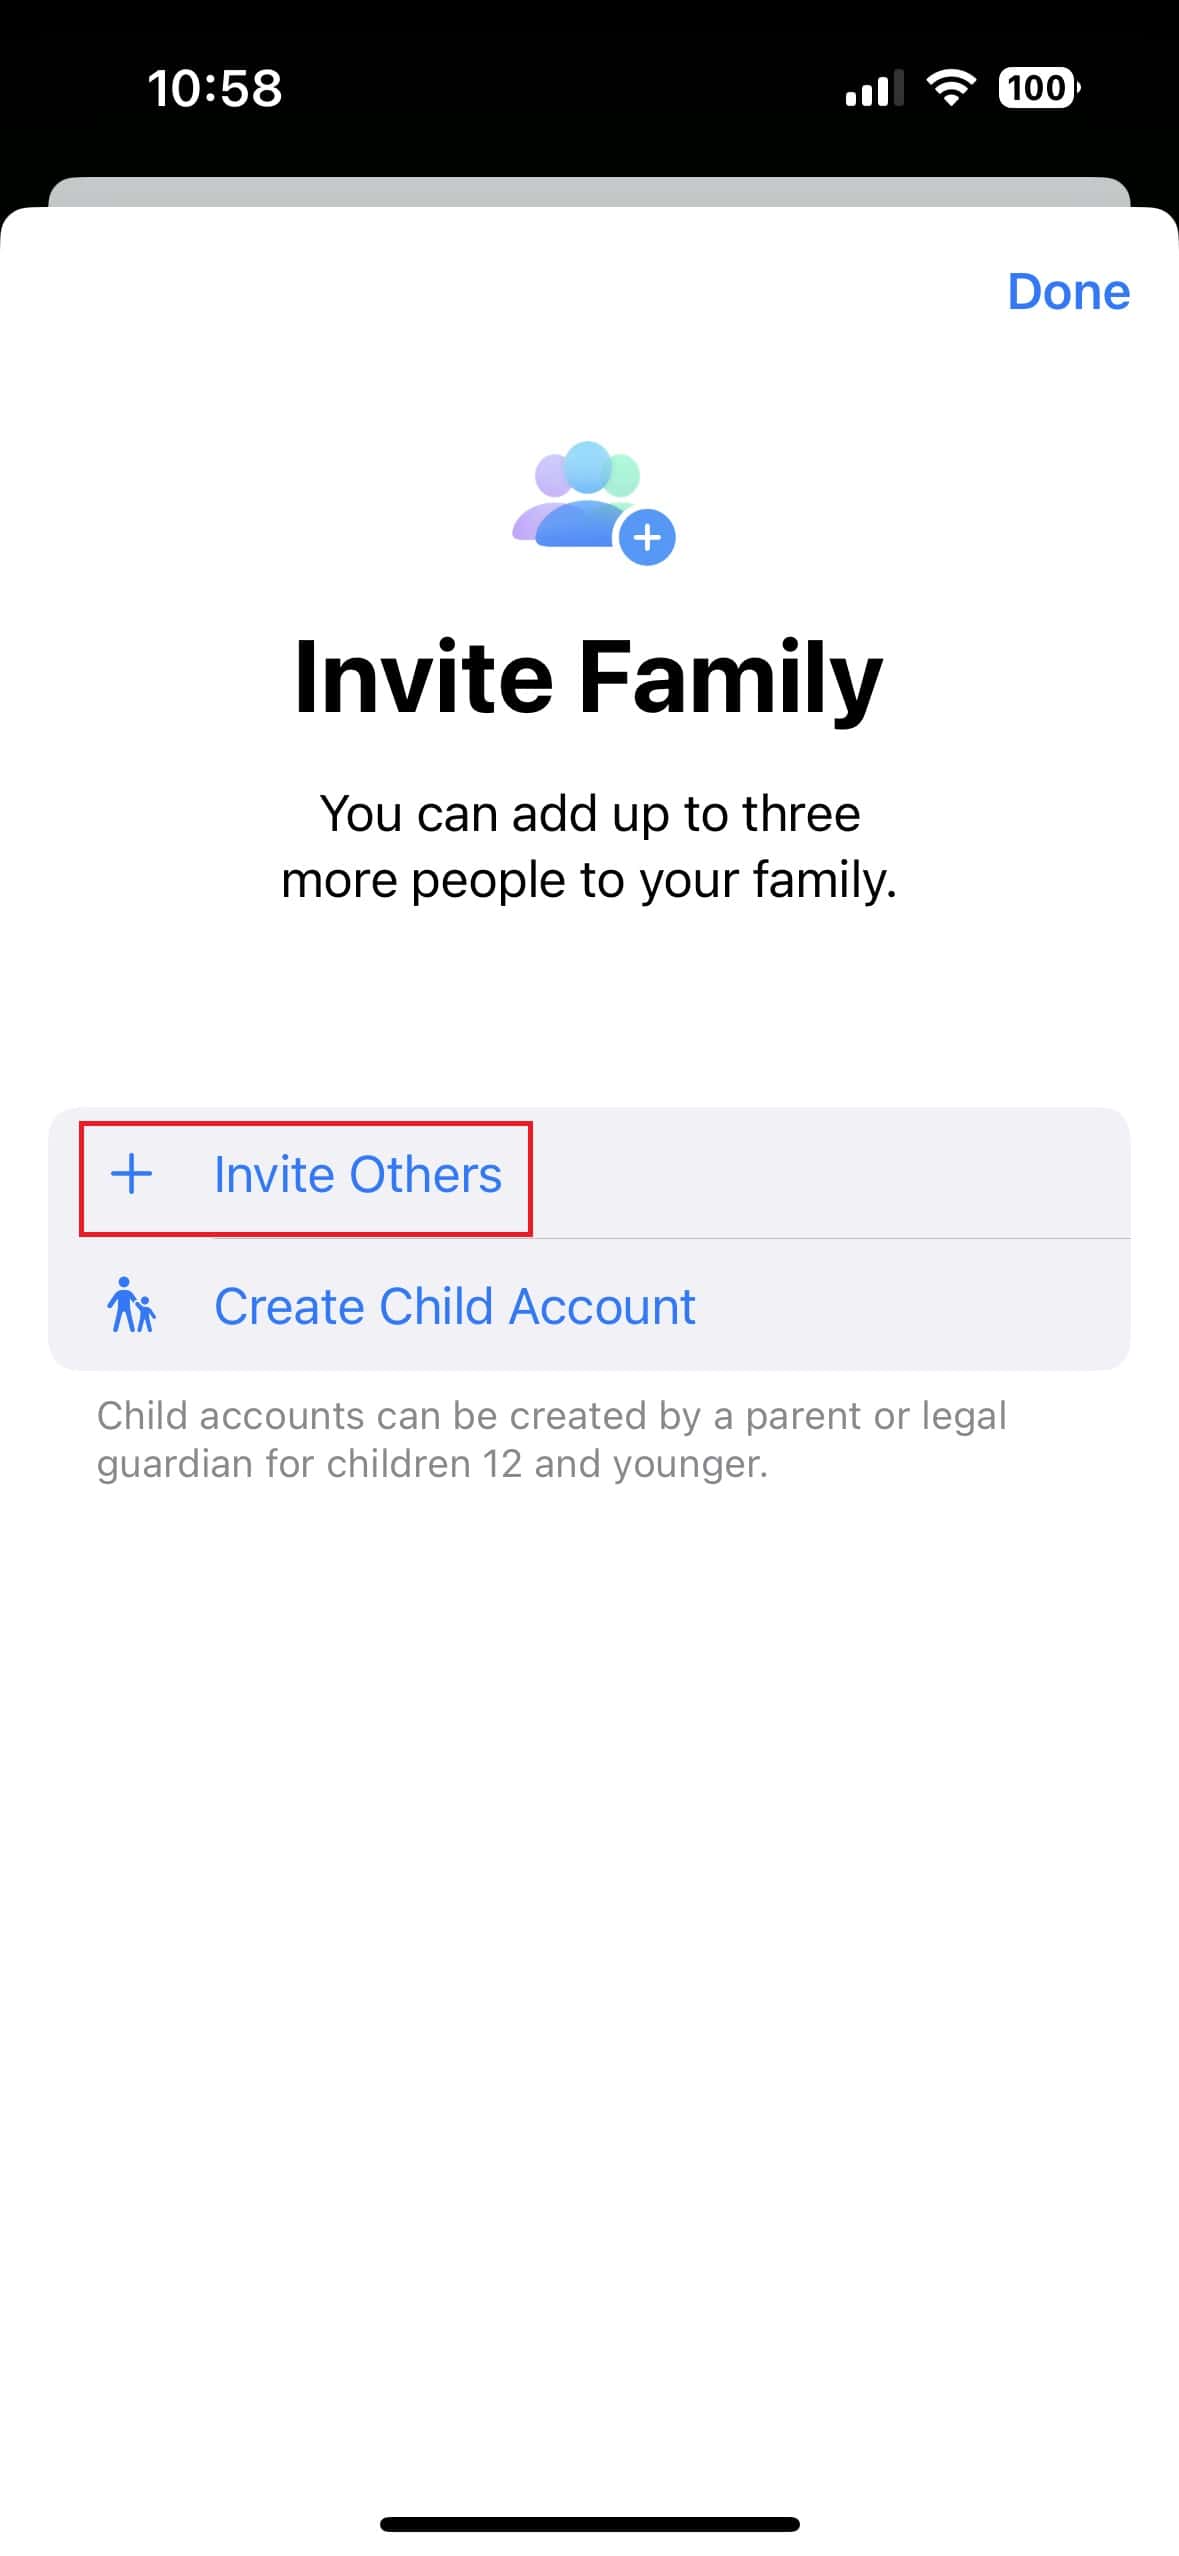 Invite a family member to share Apple account info